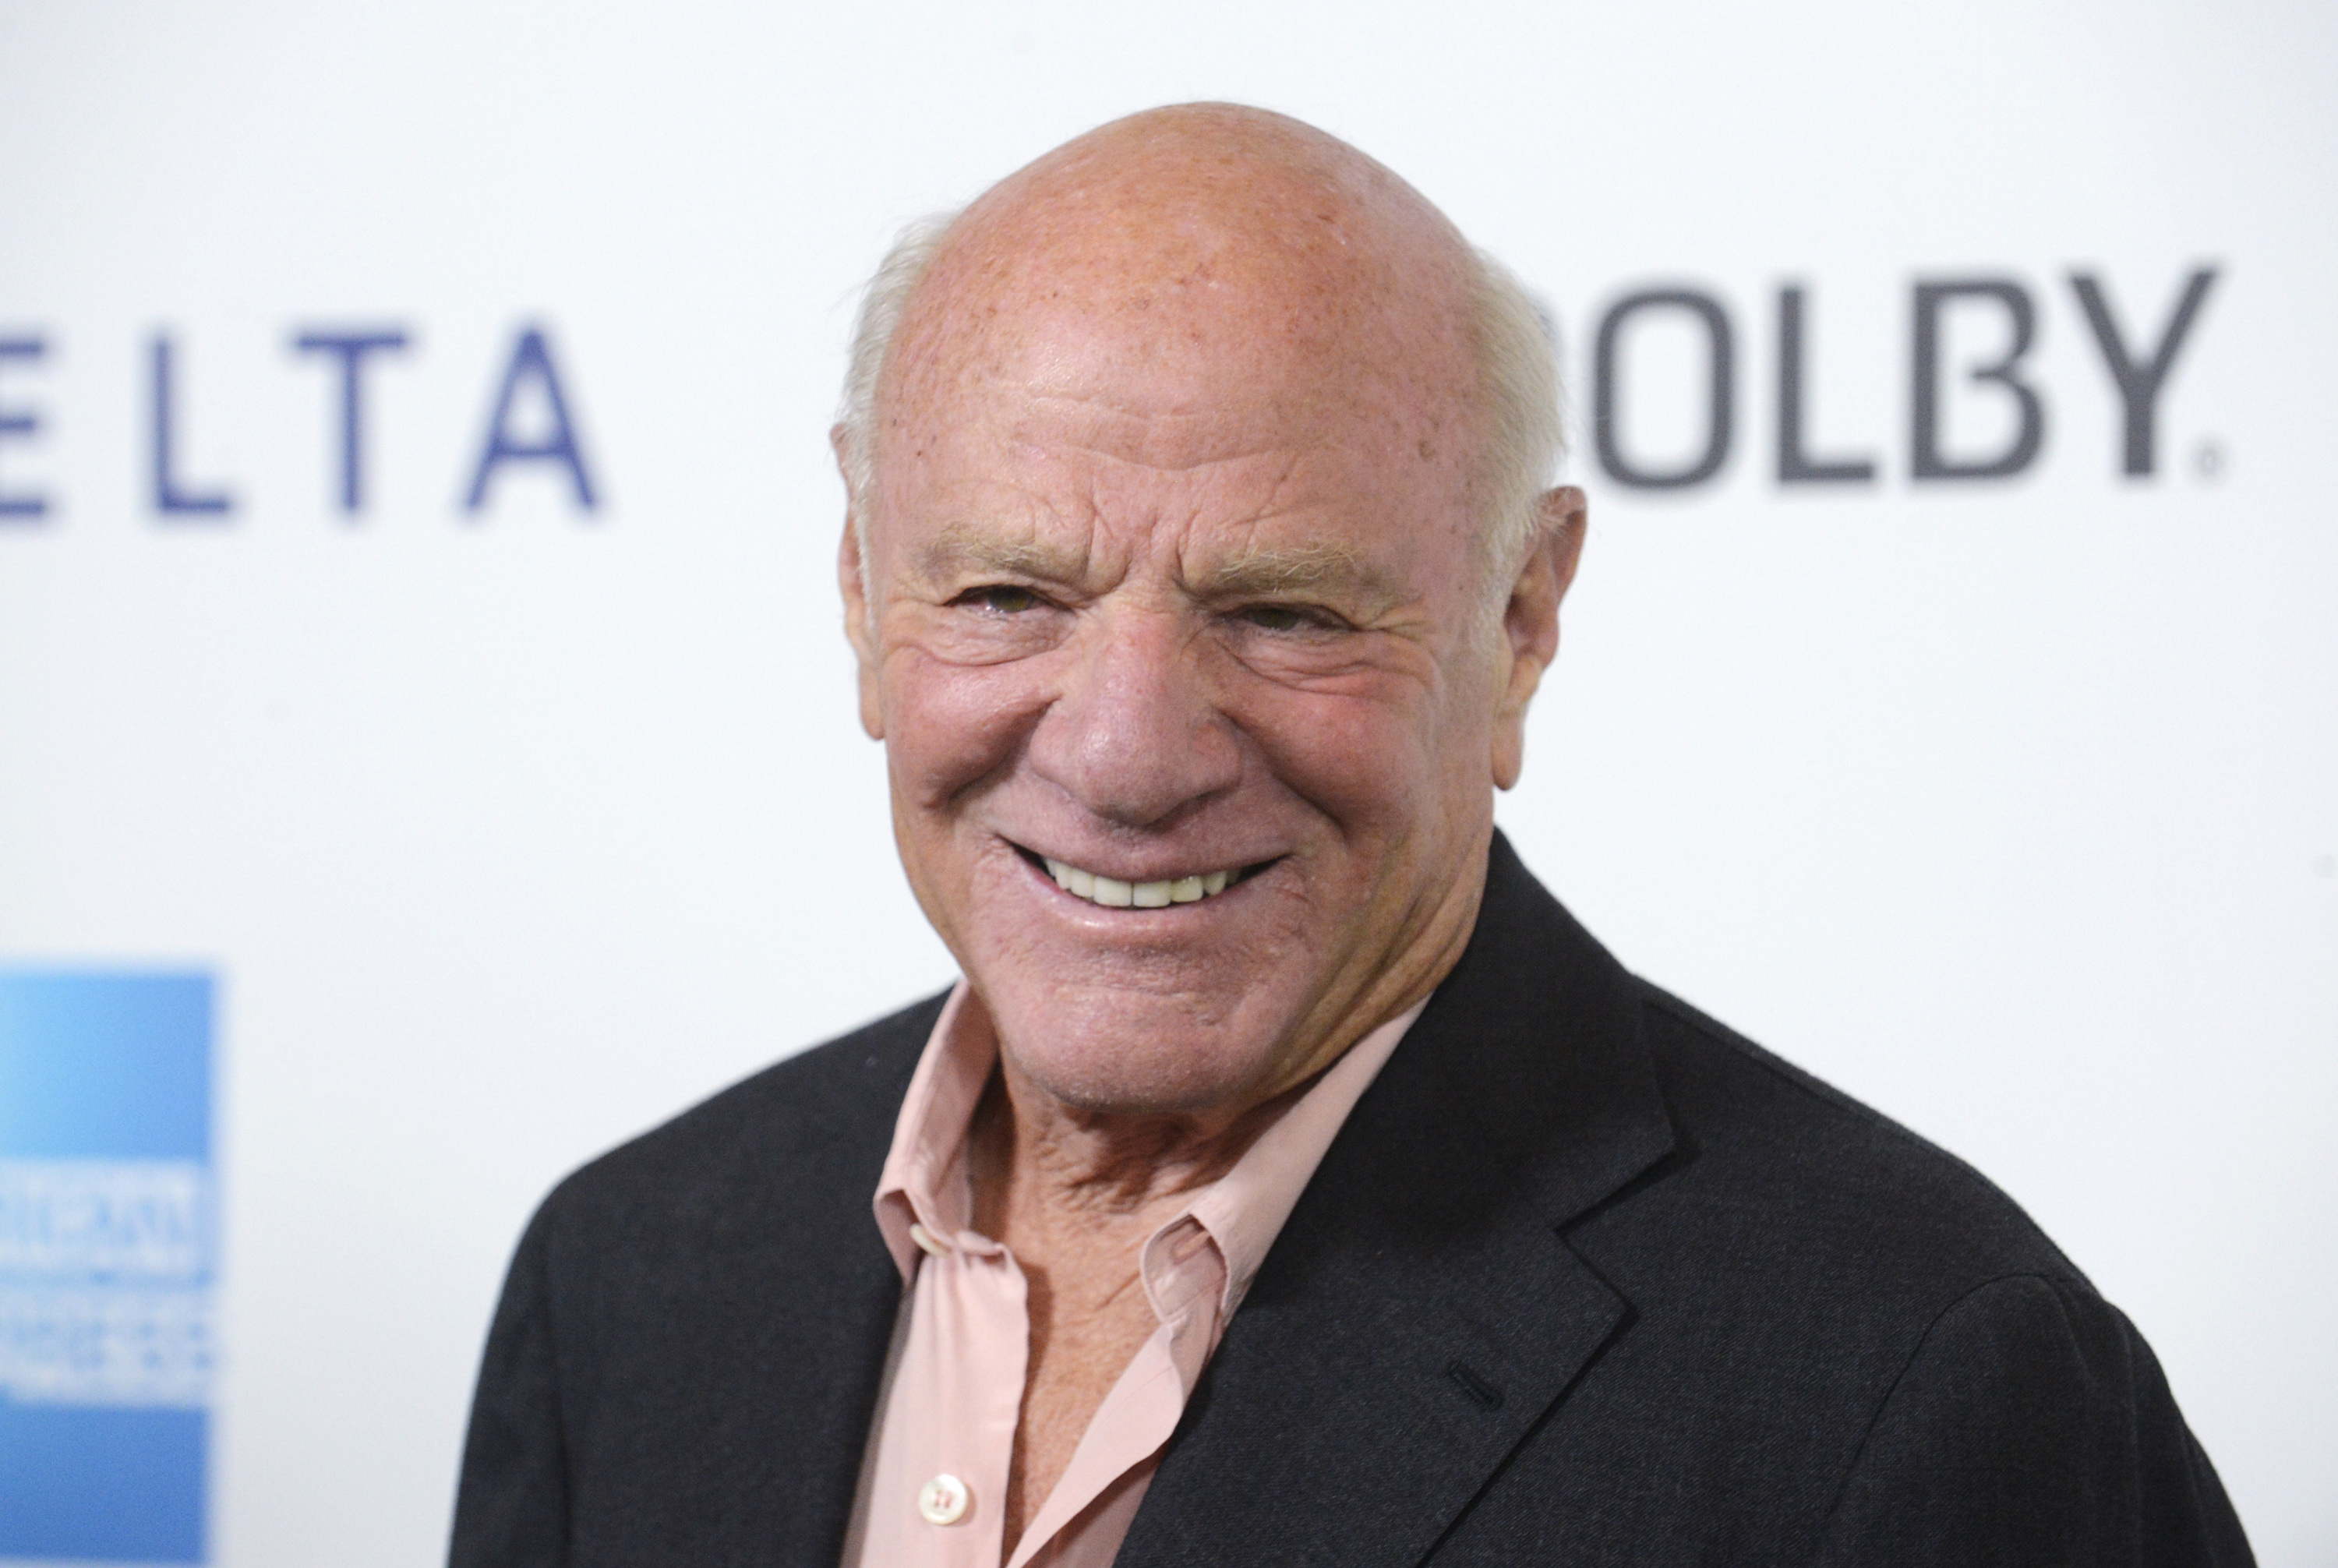 Media tycoon Barry Diller attends the performance of "One Night Only" benefiting the Motion Picture and Television Fund in Los Angeles